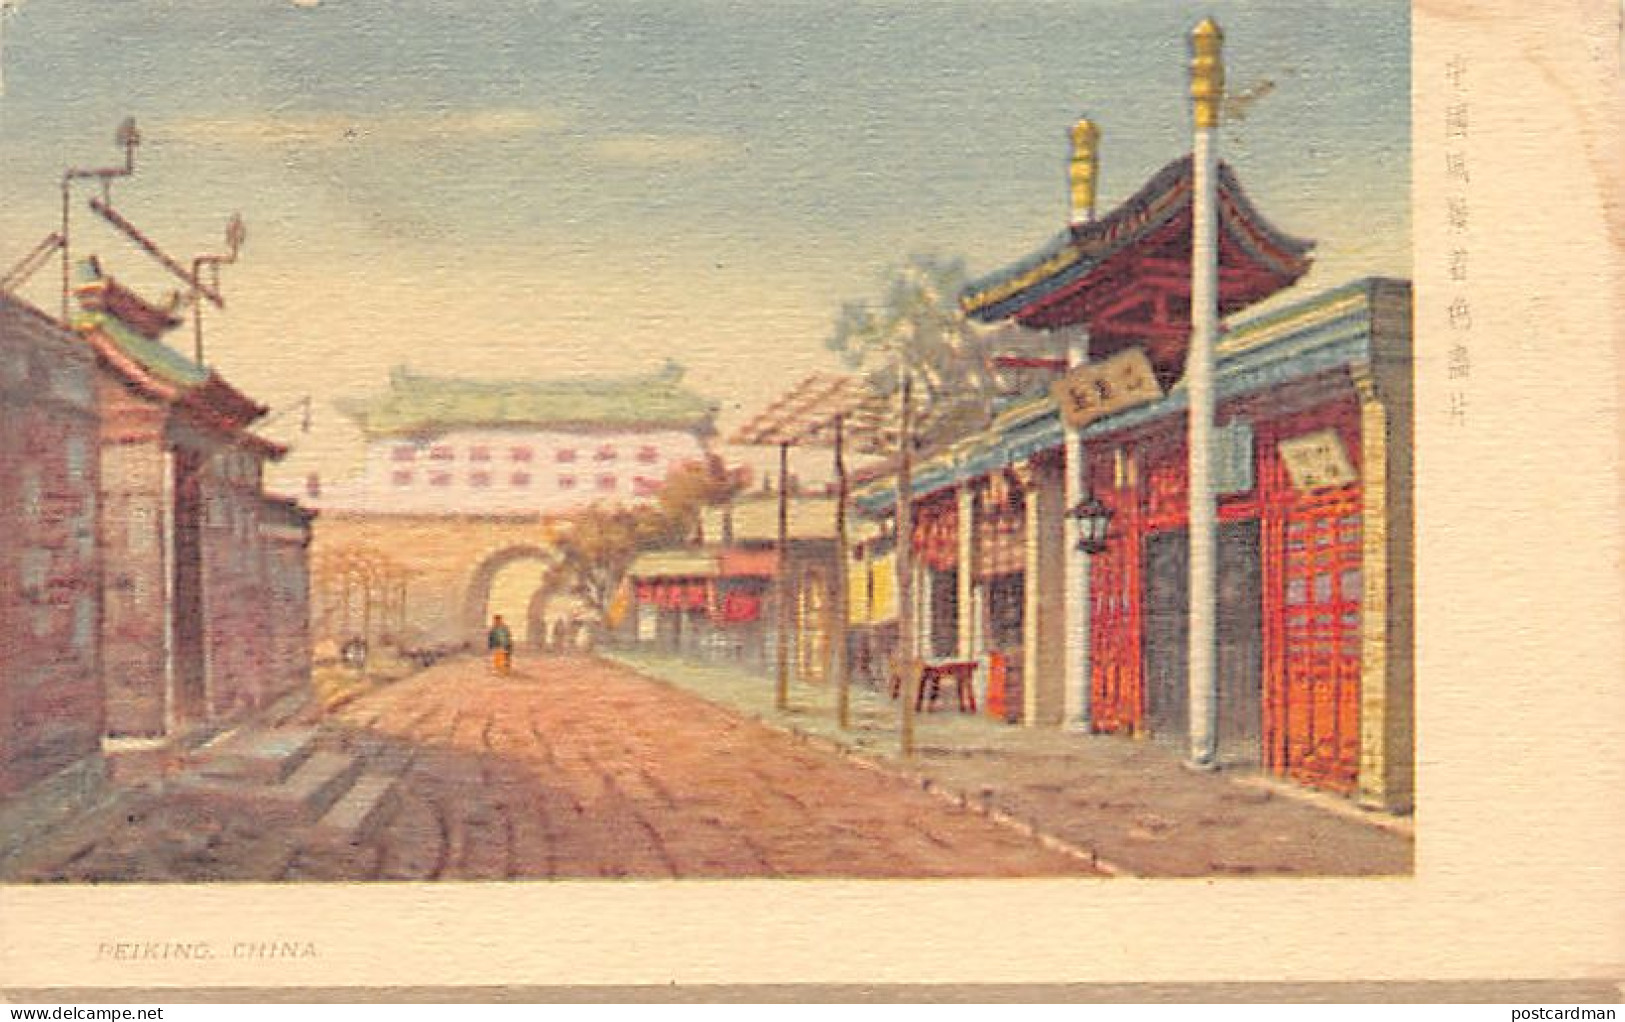 China - BEIJING - Street Scene - Publ. Unknown  - China